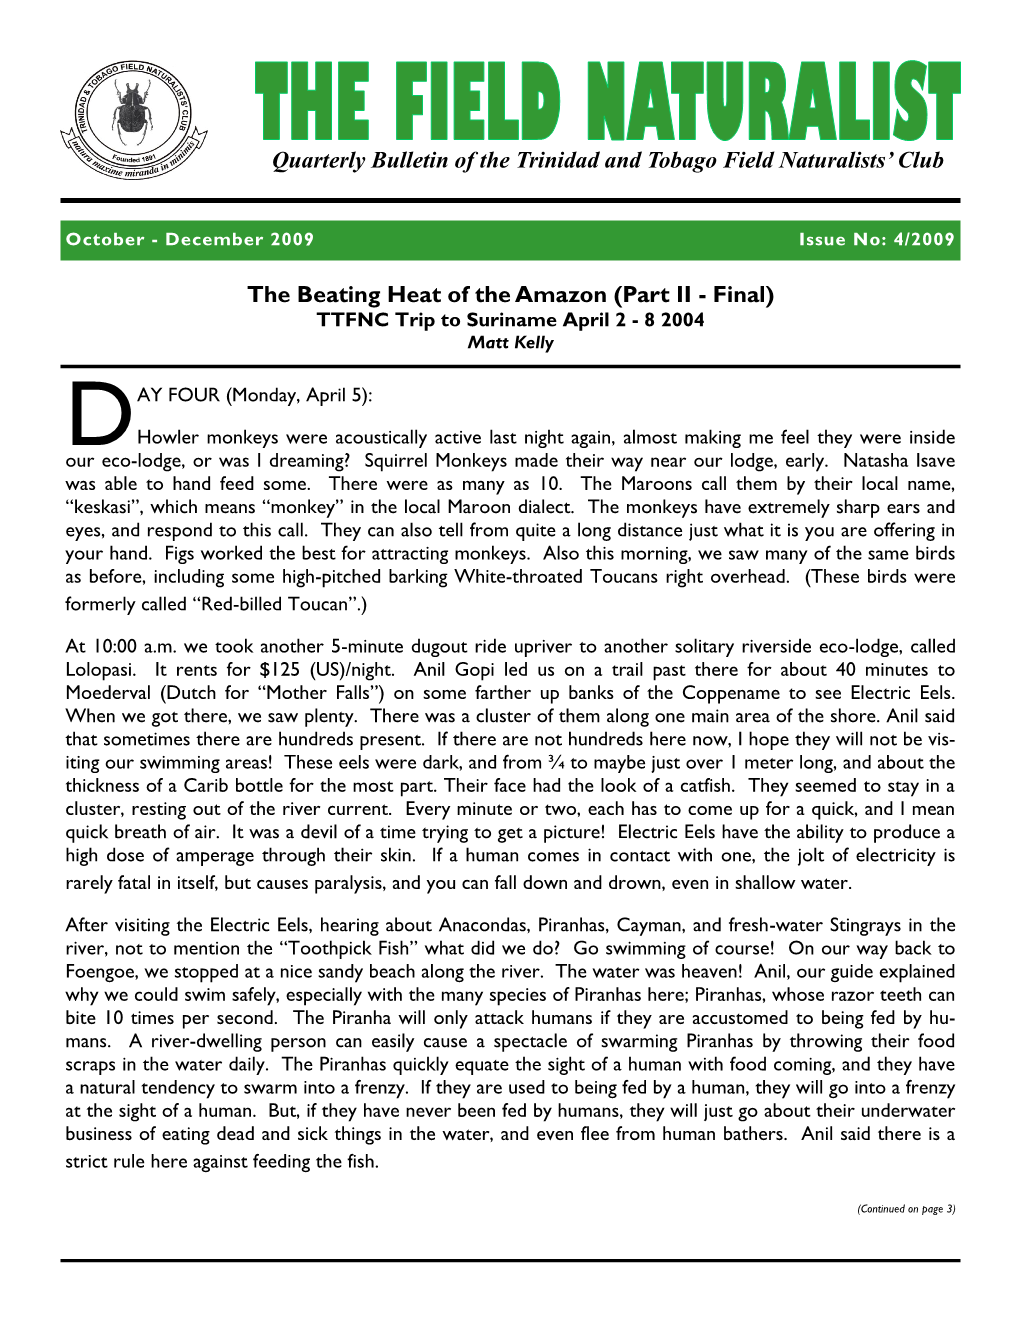 Quarterly Bulletin of the Trinidad and Tobago Field Naturalists' Club the Beating Heat of the Amazon (Part II